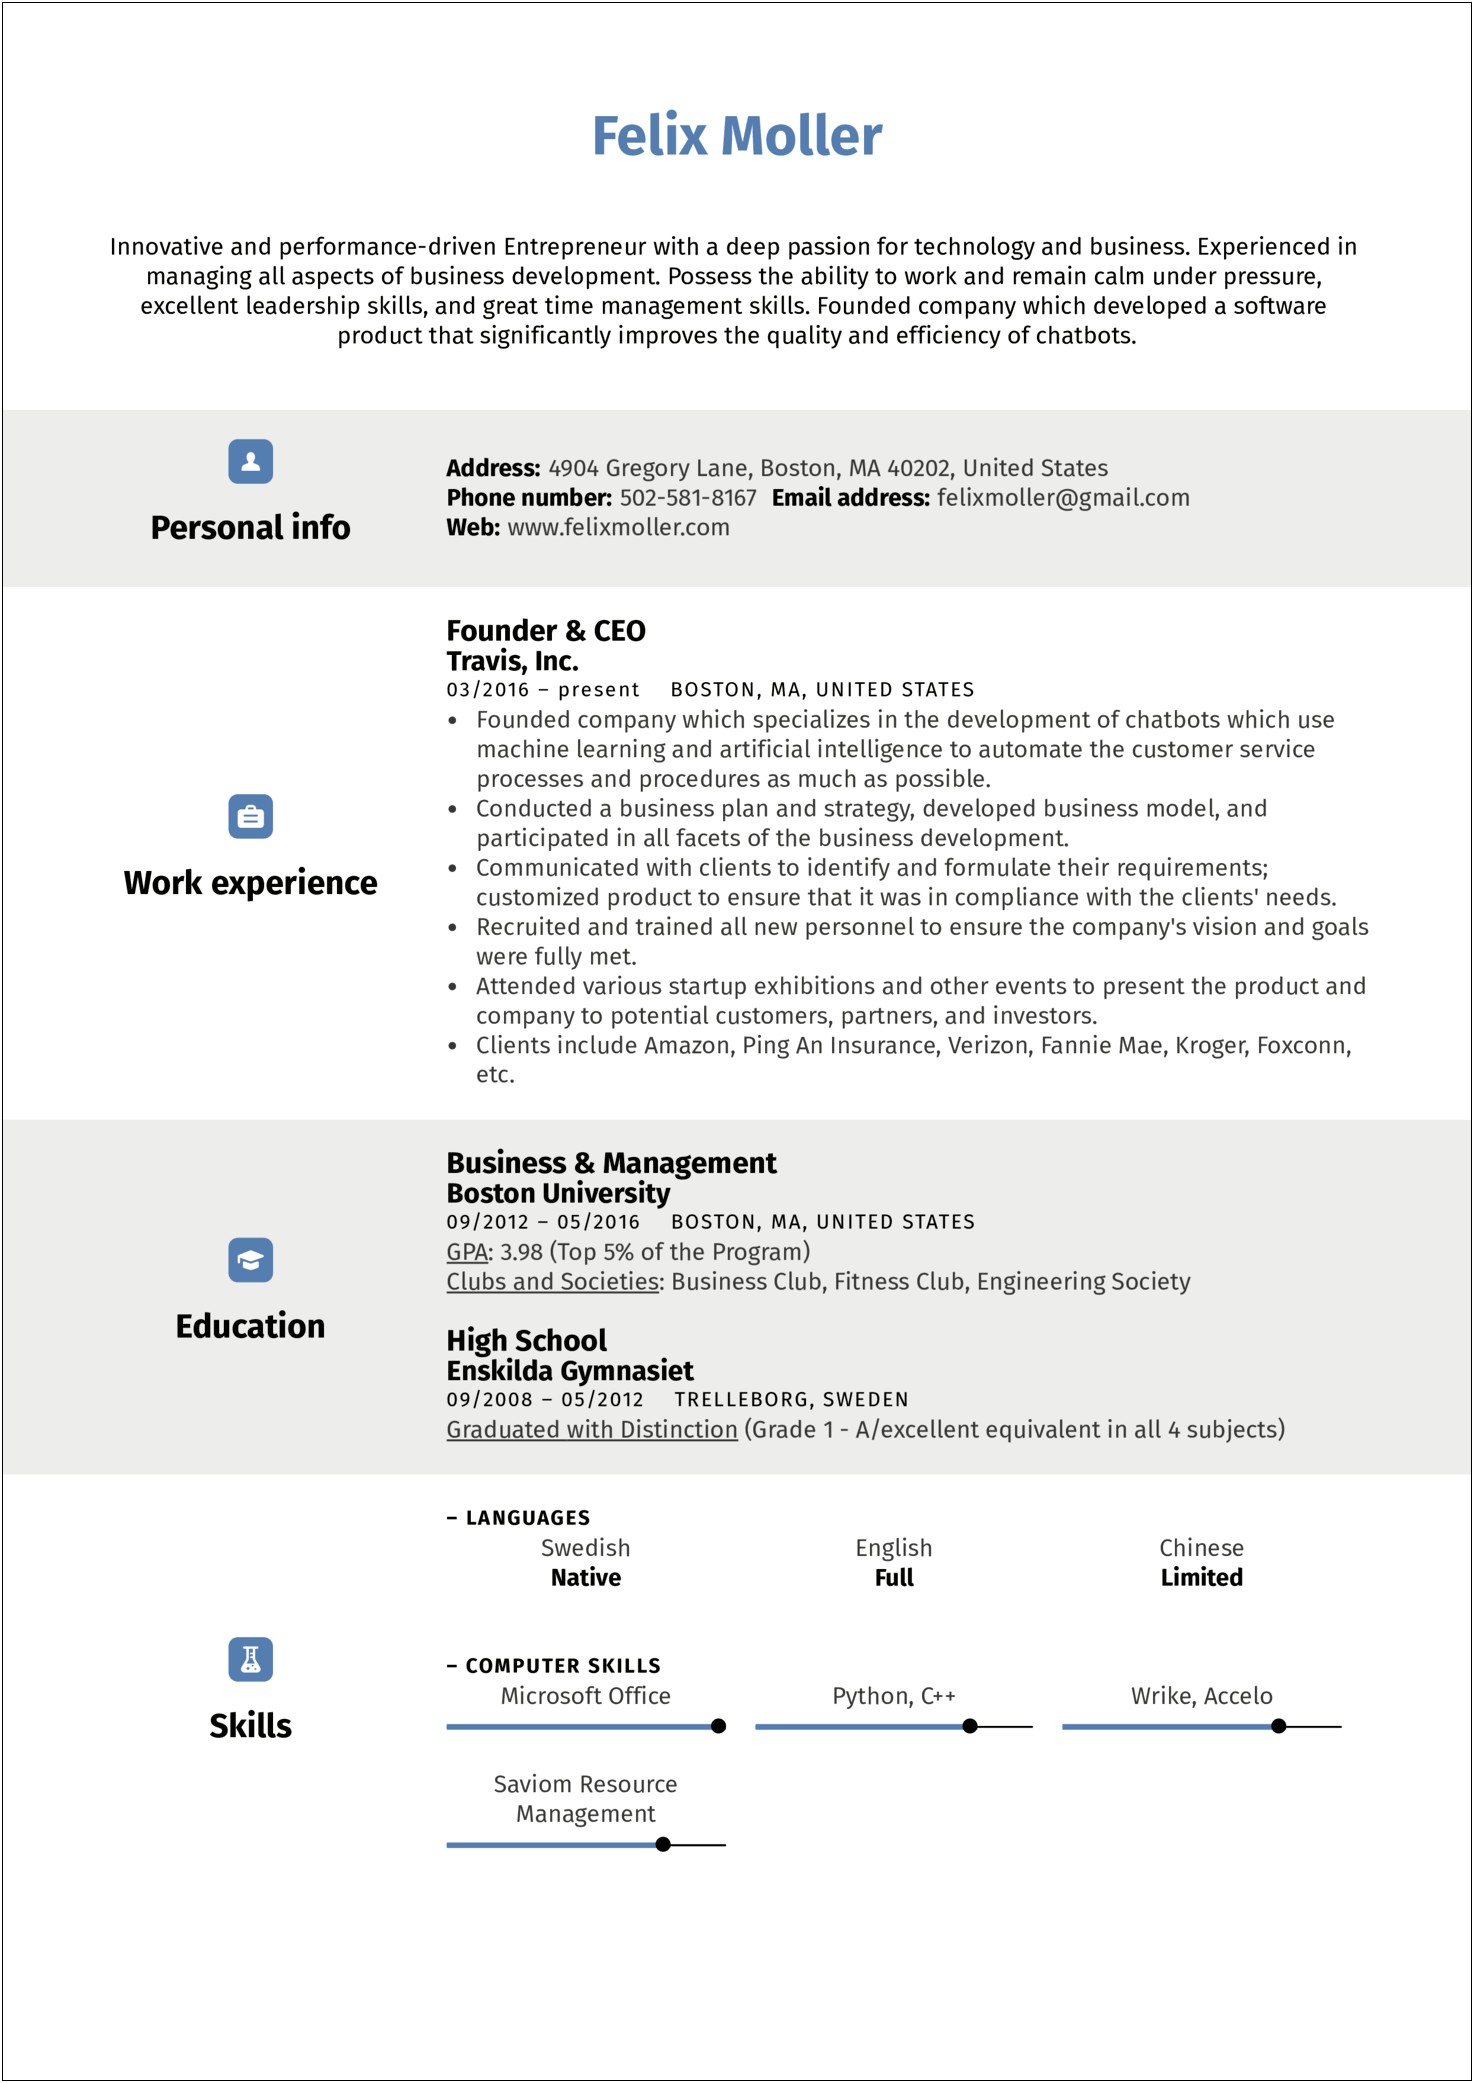 Resume Templates For Technology Sales Jobs